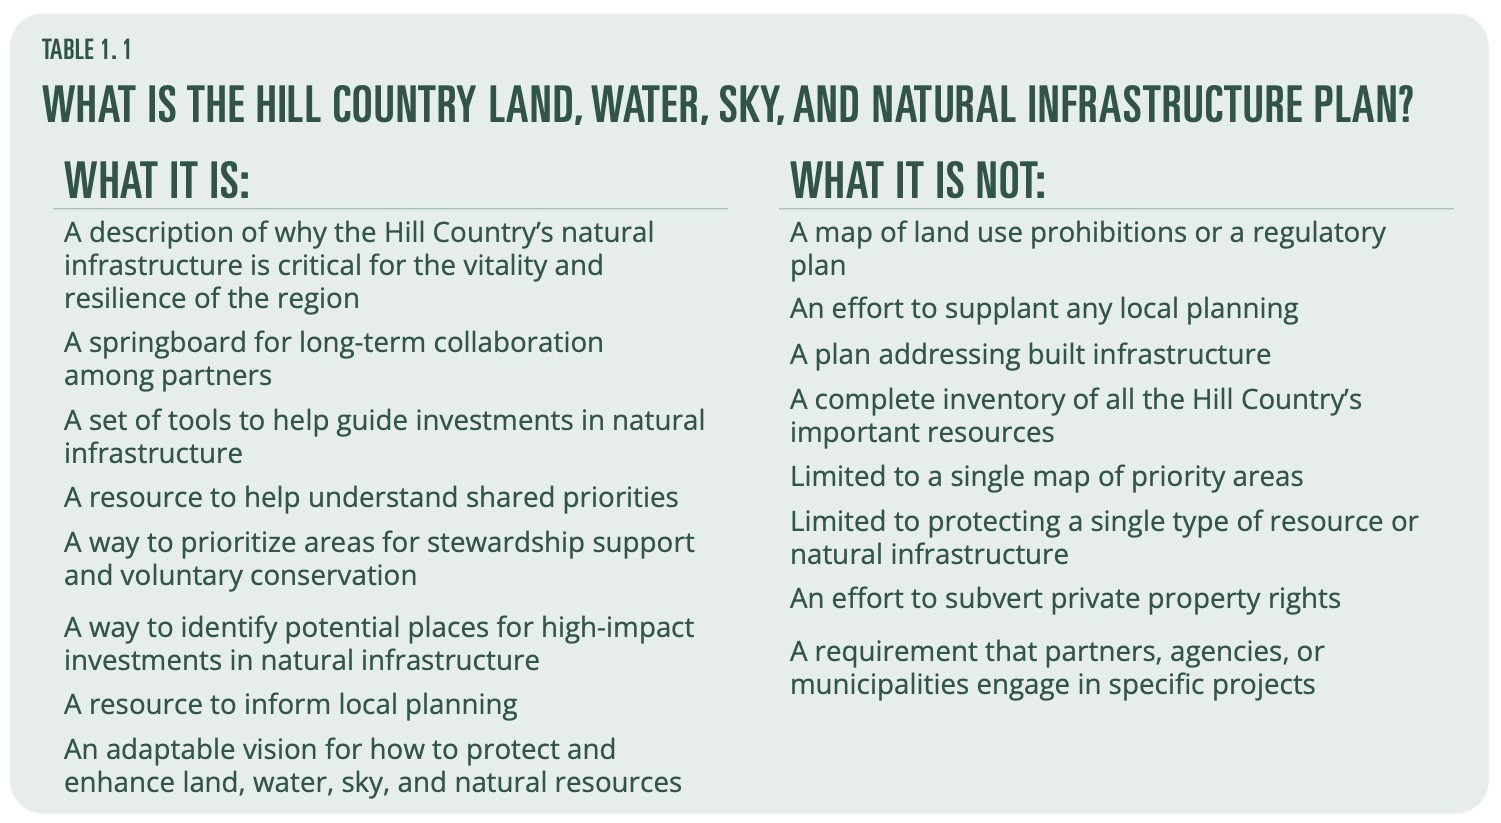 WHAT IS THE HILL COUNTRY LAND, WATER, SKY, AND NATURAL INFRASTRUCTURE PLAN? WHAT IT IS: A description of why the Hill Country’s natural infrastructure is critical for the vitality and resilience of the region A springboard for long-term collaboration among partners A set of tools to help guide investments in natural infrastructure A resource to help understand shared priorities A way to prioritize areas for stewardship support and voluntary conservation A way to identify potential places for high-impact investments in natural infrastructure A resource to inform local planning An adaptable vision for how to protect and enhance land, water, sky, and natural resources WHAT IT IS NOT: A map of land use prohibitions or a regulatory plan An effort to supplant any local planning A plan addressing built infrastructure A complete inventory of all the Hill Country’s important resources Limited to a single map of priority areas Limited to protecting a single type of resource or natural infrastructure An effort to subvert private property rights A requirement that partners, agencies, or municipalities engage in specific projects